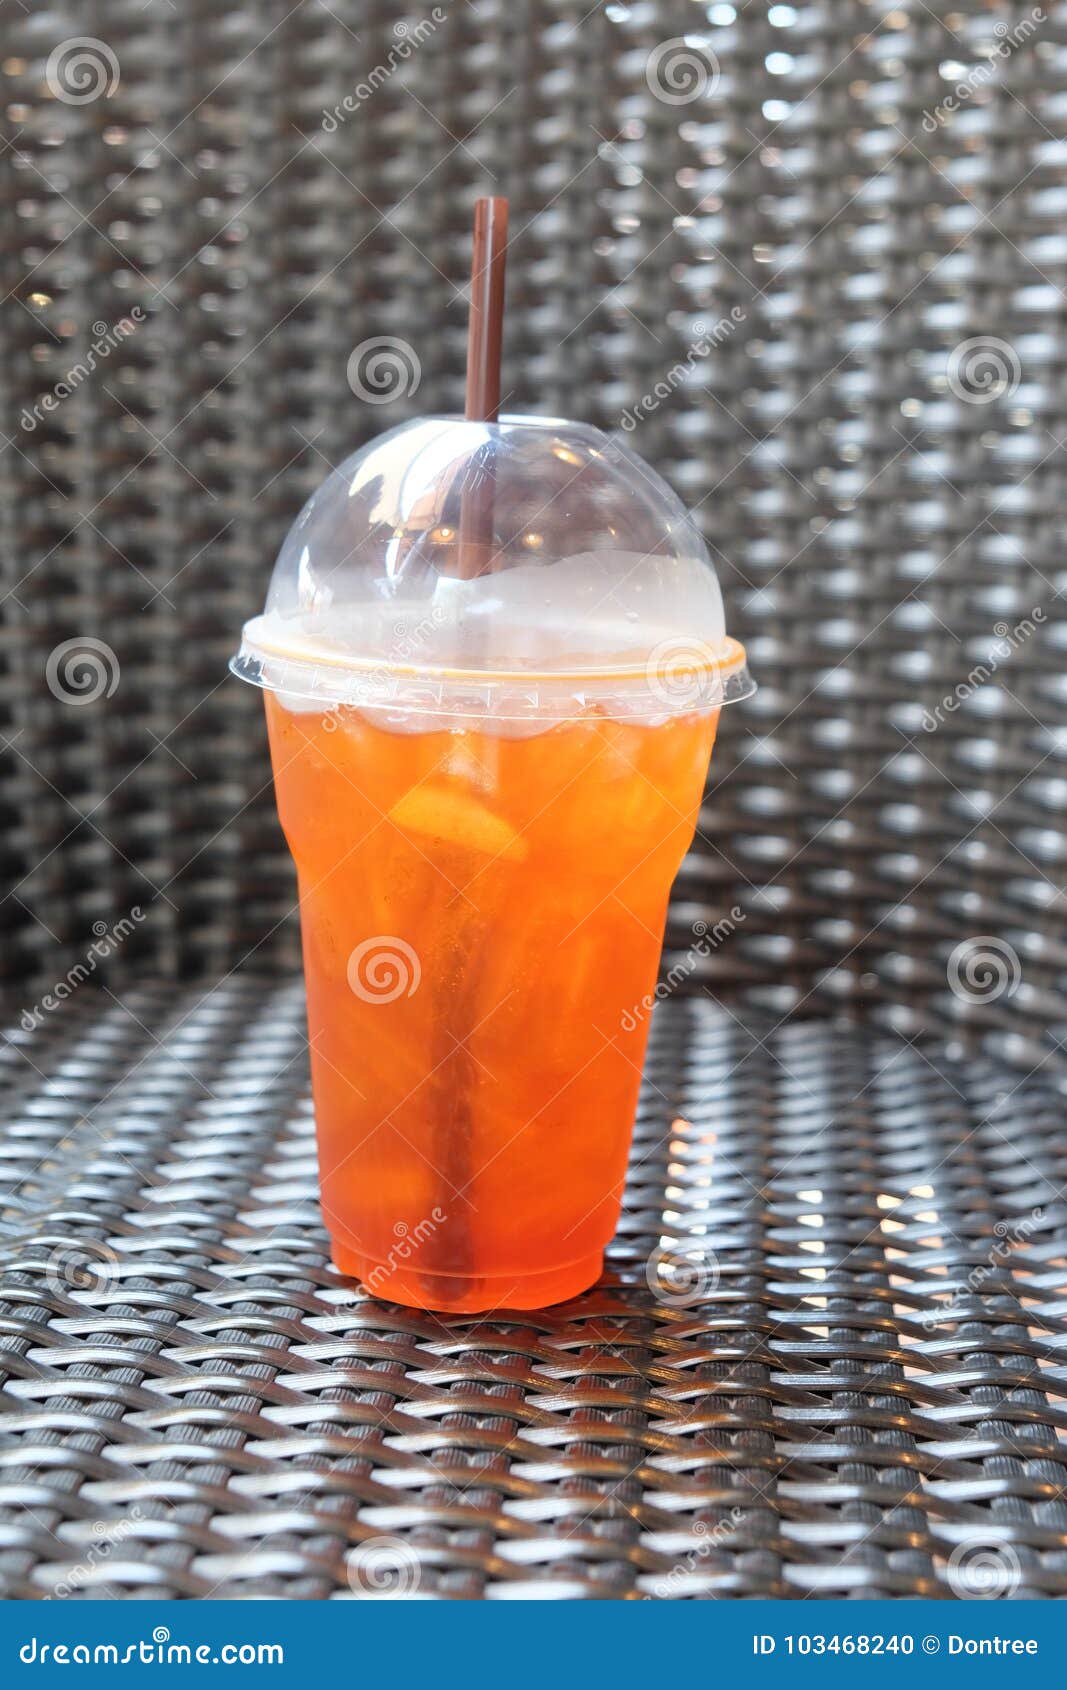 Cold Iced Tea with Lemon and Straw Stock Photo - Image of vintage, striped:  103468240